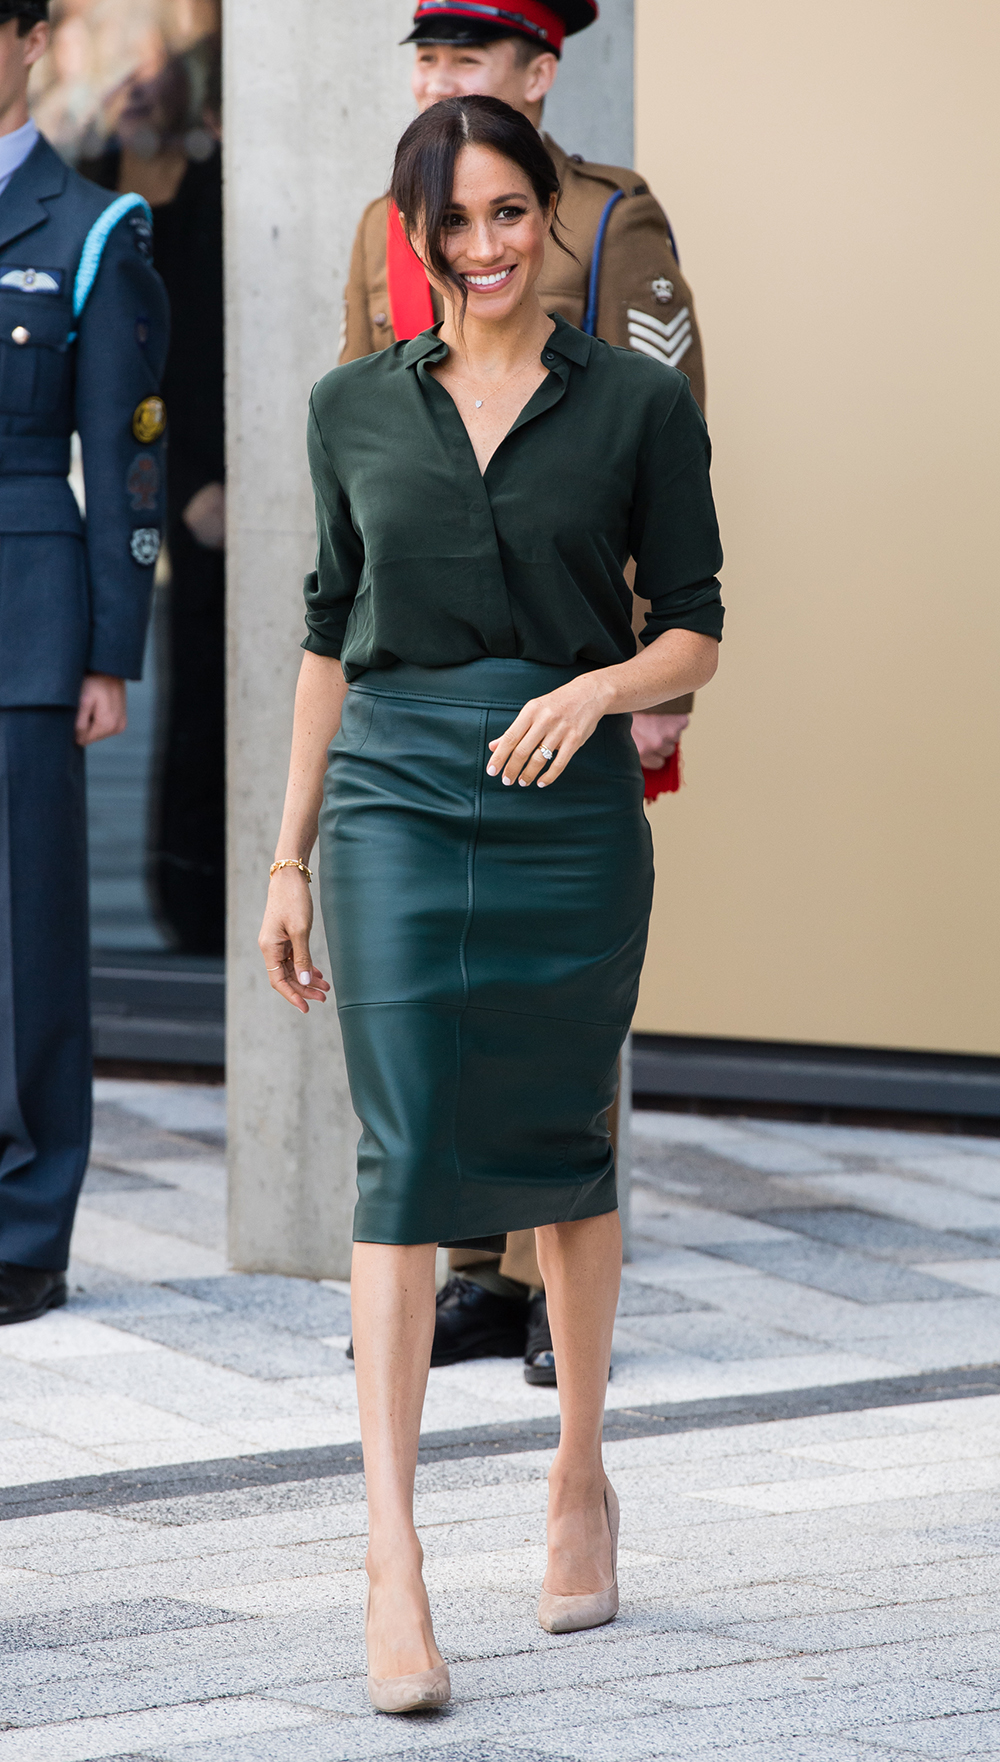 BOGNOR REGIS, UNITED KINGDOM - OCTOBER 03: Meghan, Duchess of Sussex visits University of Chichester's Engineering and Digital Technology Park during an official visit to Sussex on October 3, 2018 in Bognor Regis, United Kingdom. The Duke and Duchess married on May 19th 2018 in Windsor and were conferred The Duke & Duchess of Sussex by The Queen. The Duke and Duchess married on May 19th 2018 in Windsor and were conferred The Duke & Duchess of Sussex by The Queen. (Photo by Samir Hussein/Samir Hussein/WireImage)